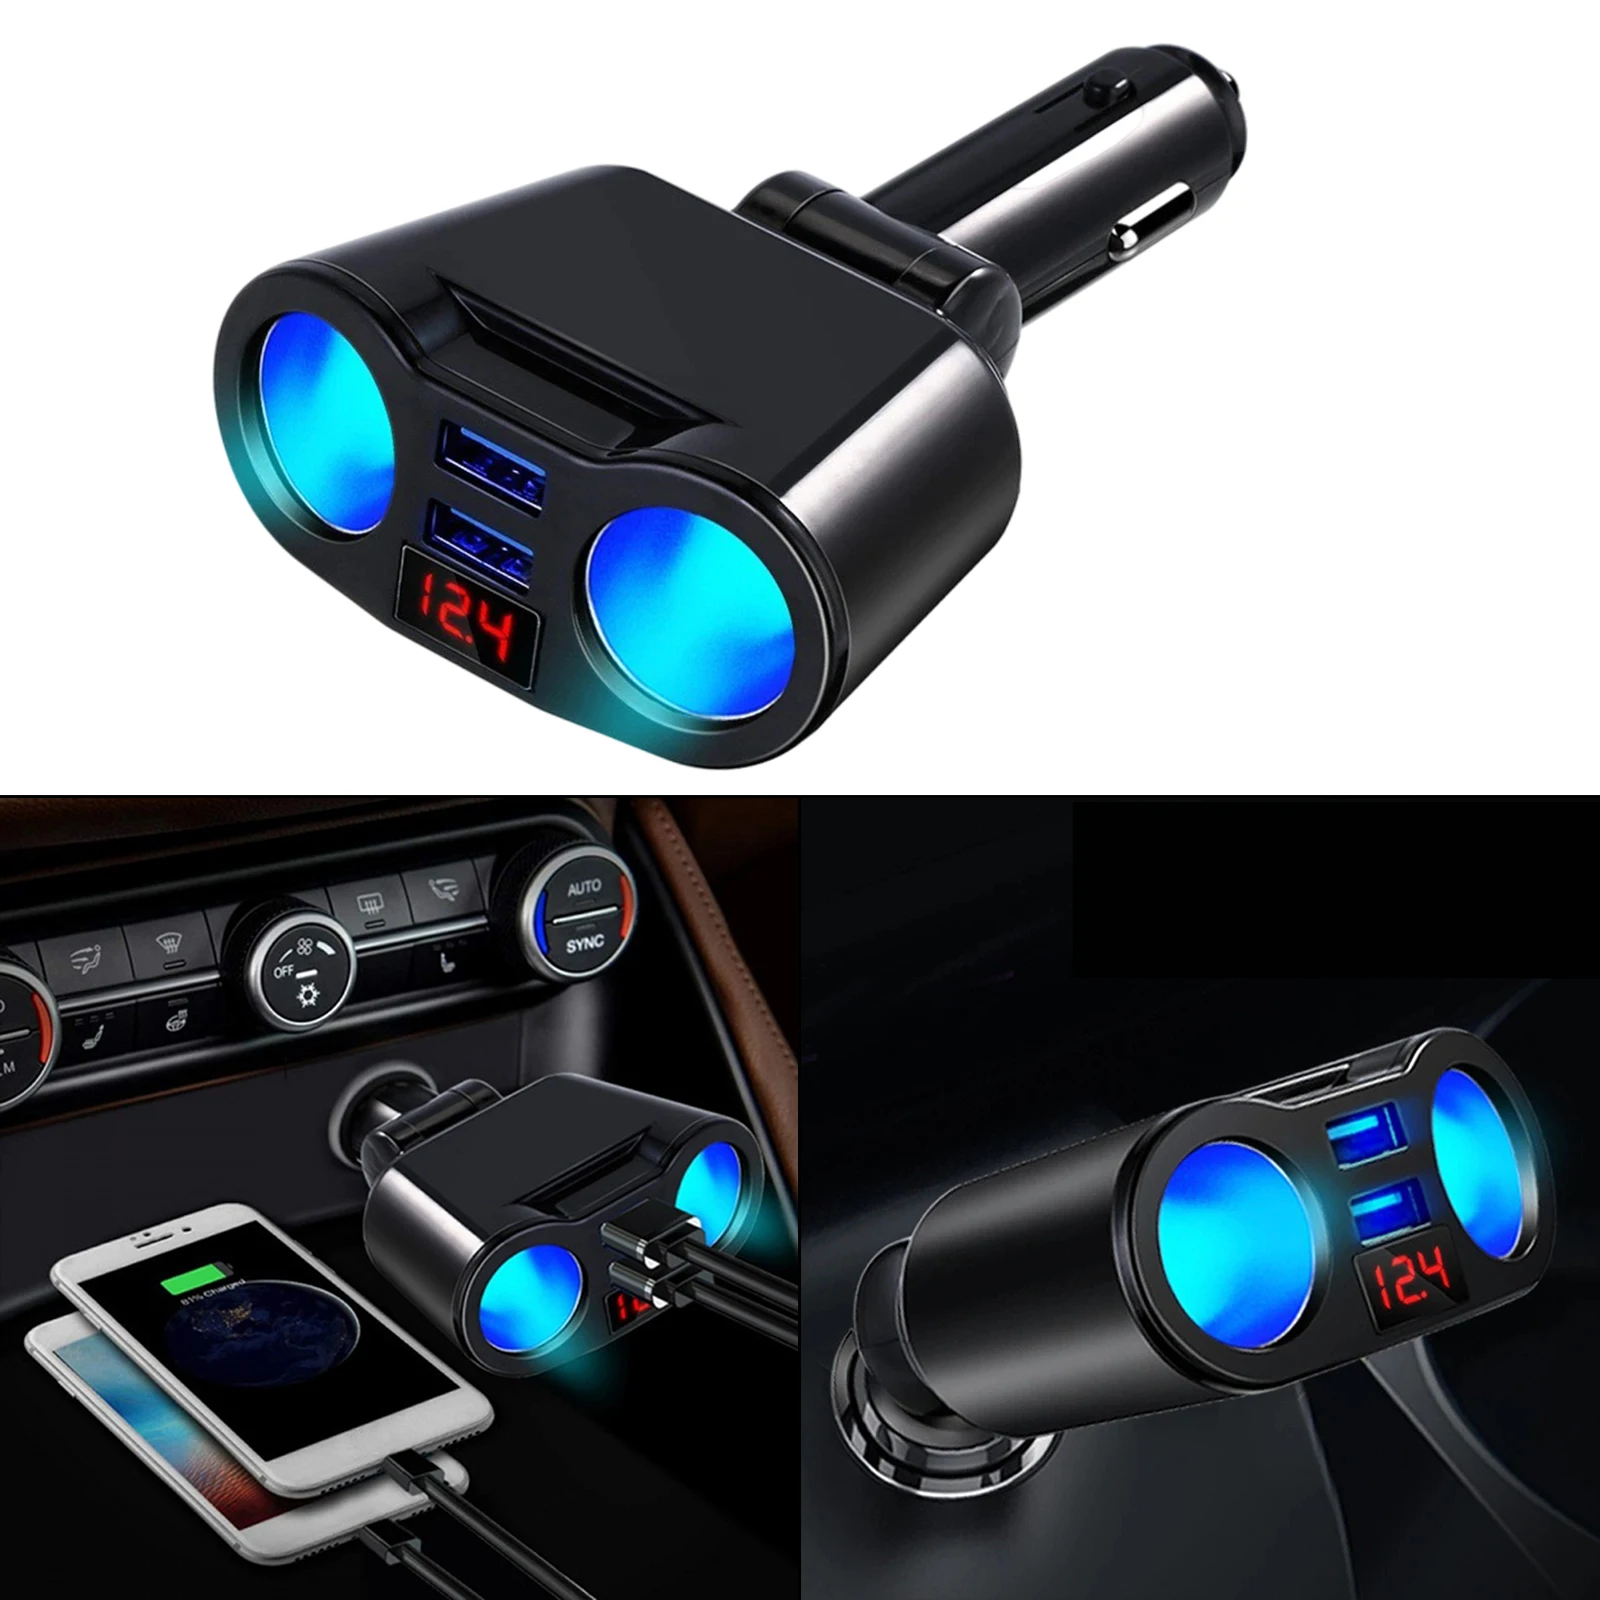 DC 12V Vehicle Cigarette Lighter Adapter Charger 2-Way Dual Plug 5V 3.1A Supplies for Phones Bluetooth Headset Digital Products